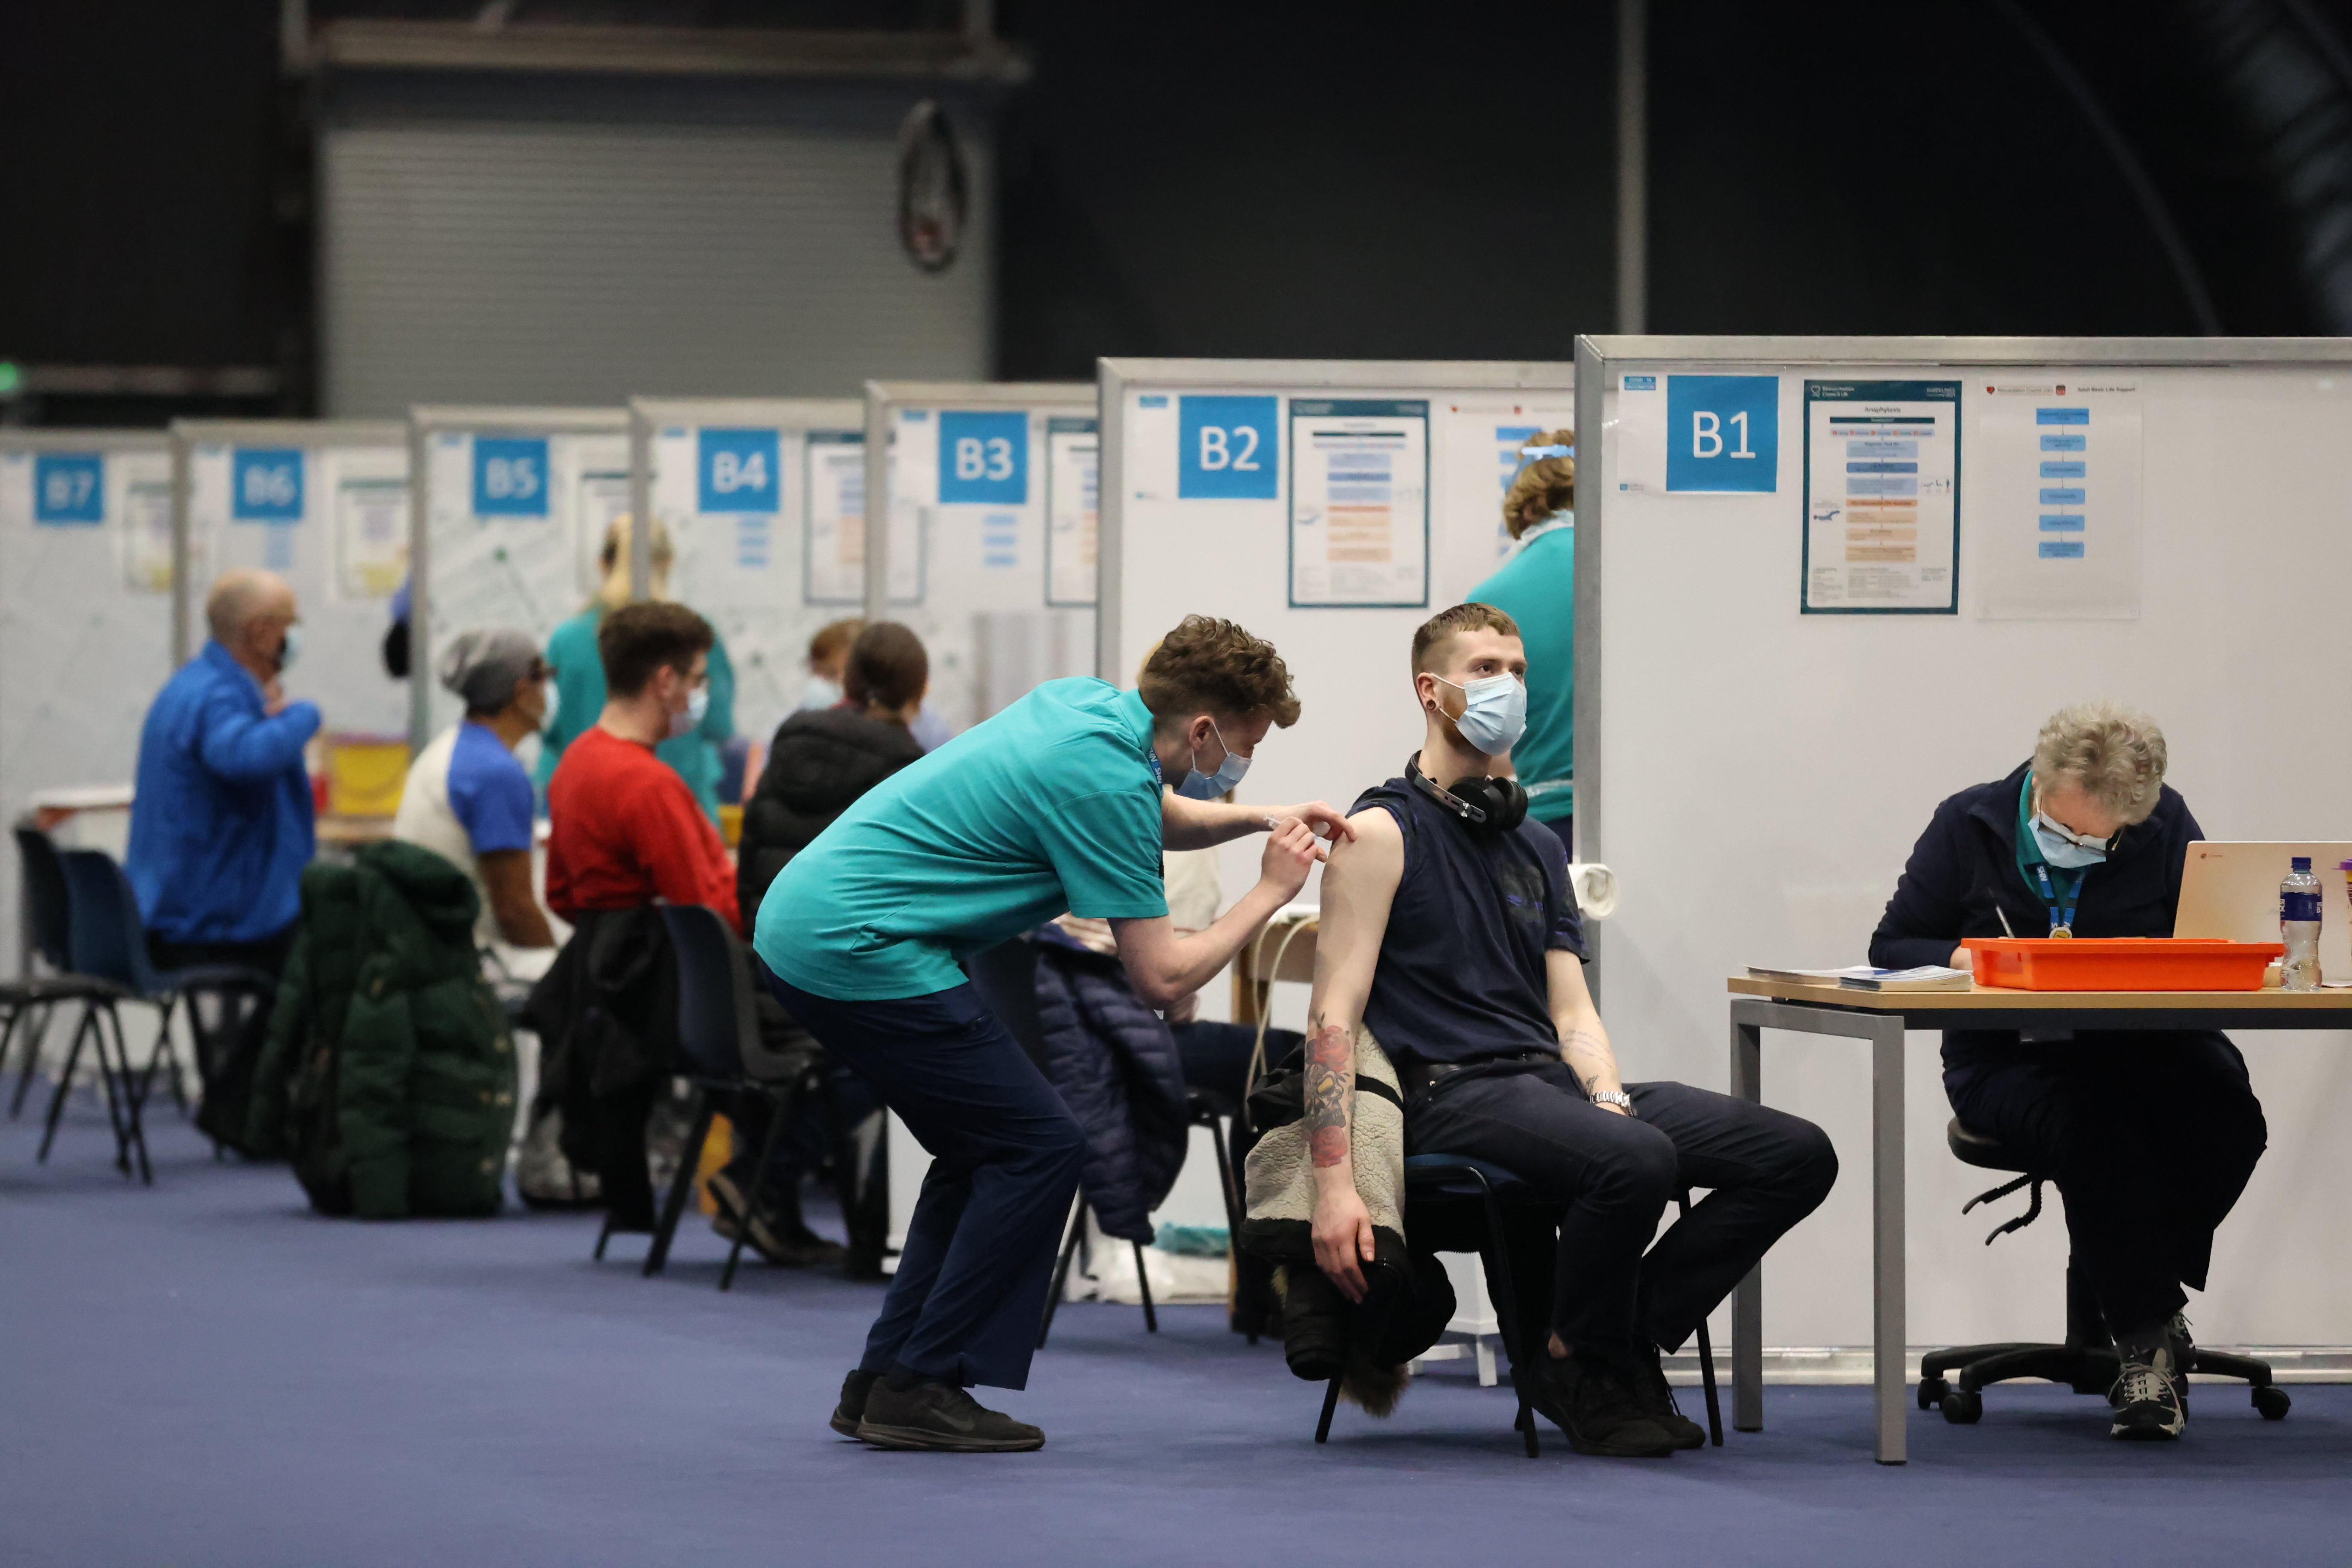 People get vaccinations at a Covid-19 booster vaccination centre at the Titanic Exhibition Centre in Belfast (Liam McBurney/PA)